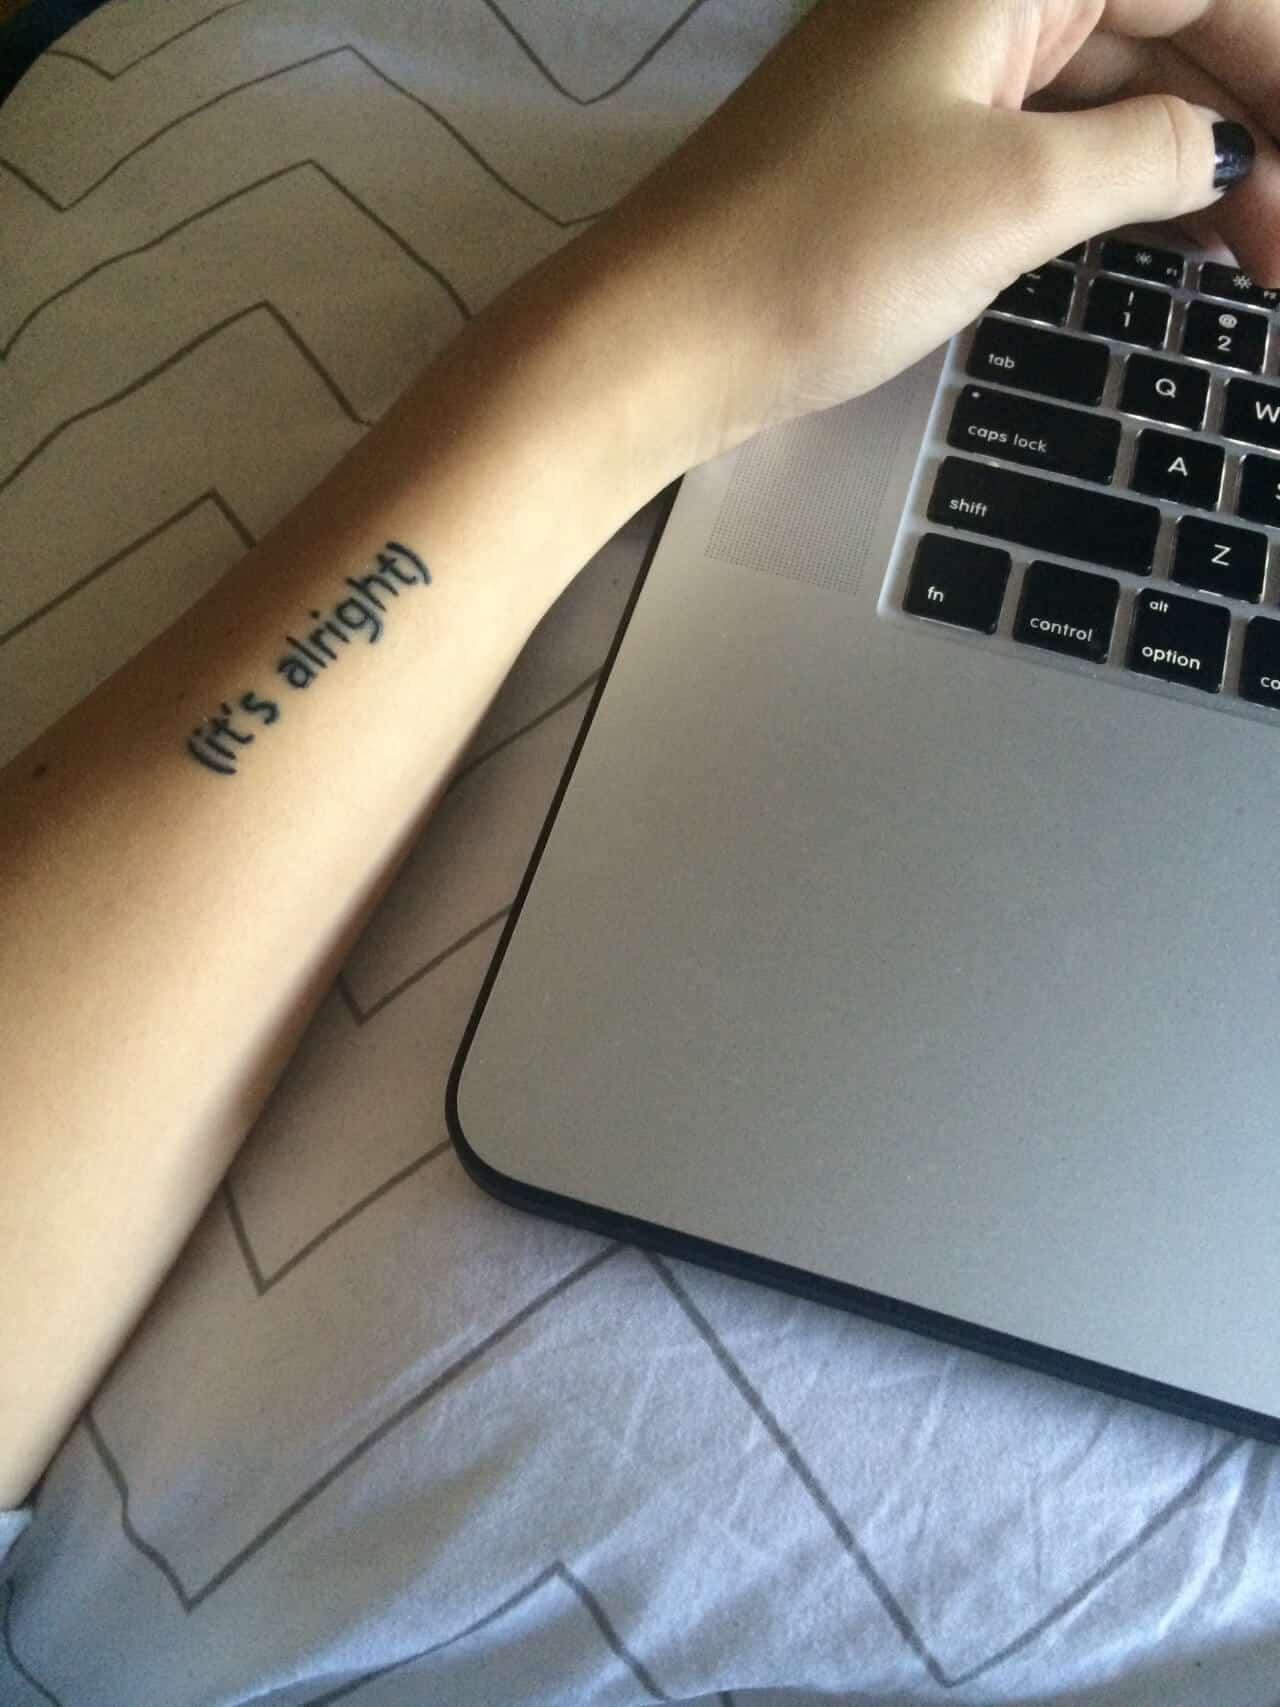 "(it's alright)" arm quote tattoo